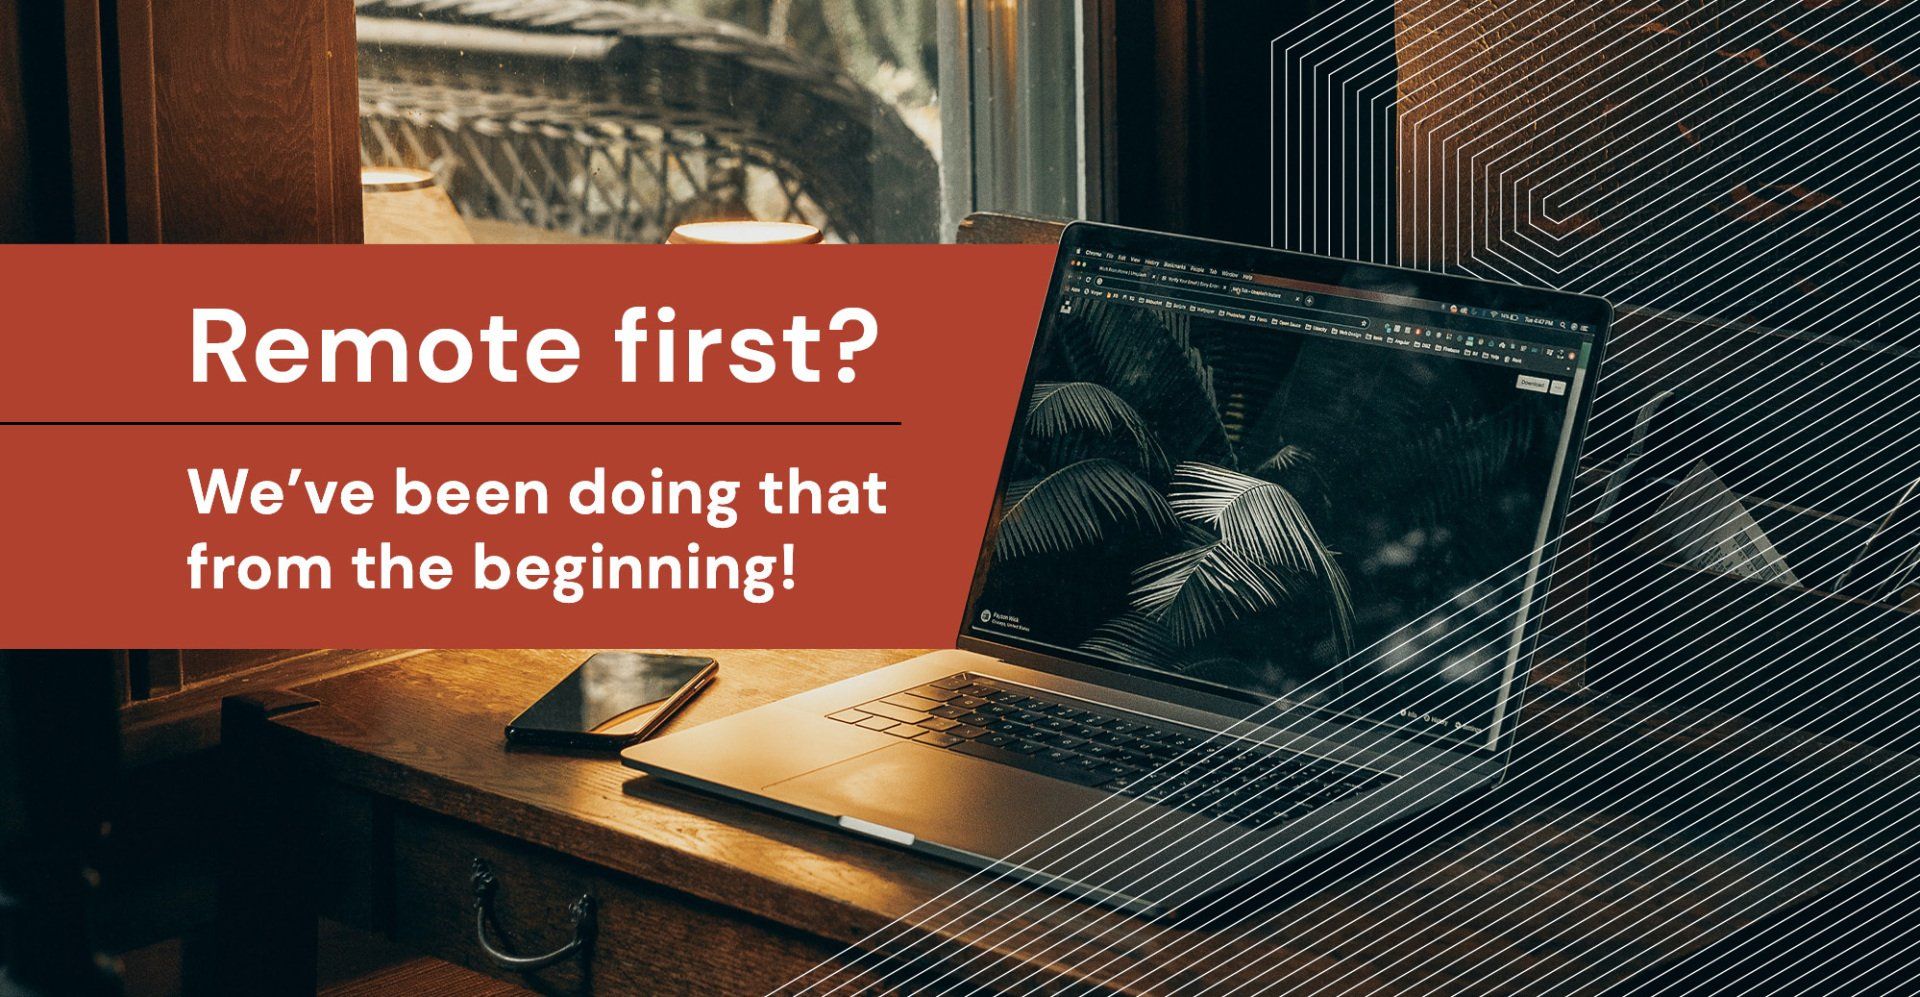 Remote first? We’ve been doing that from the beginning!